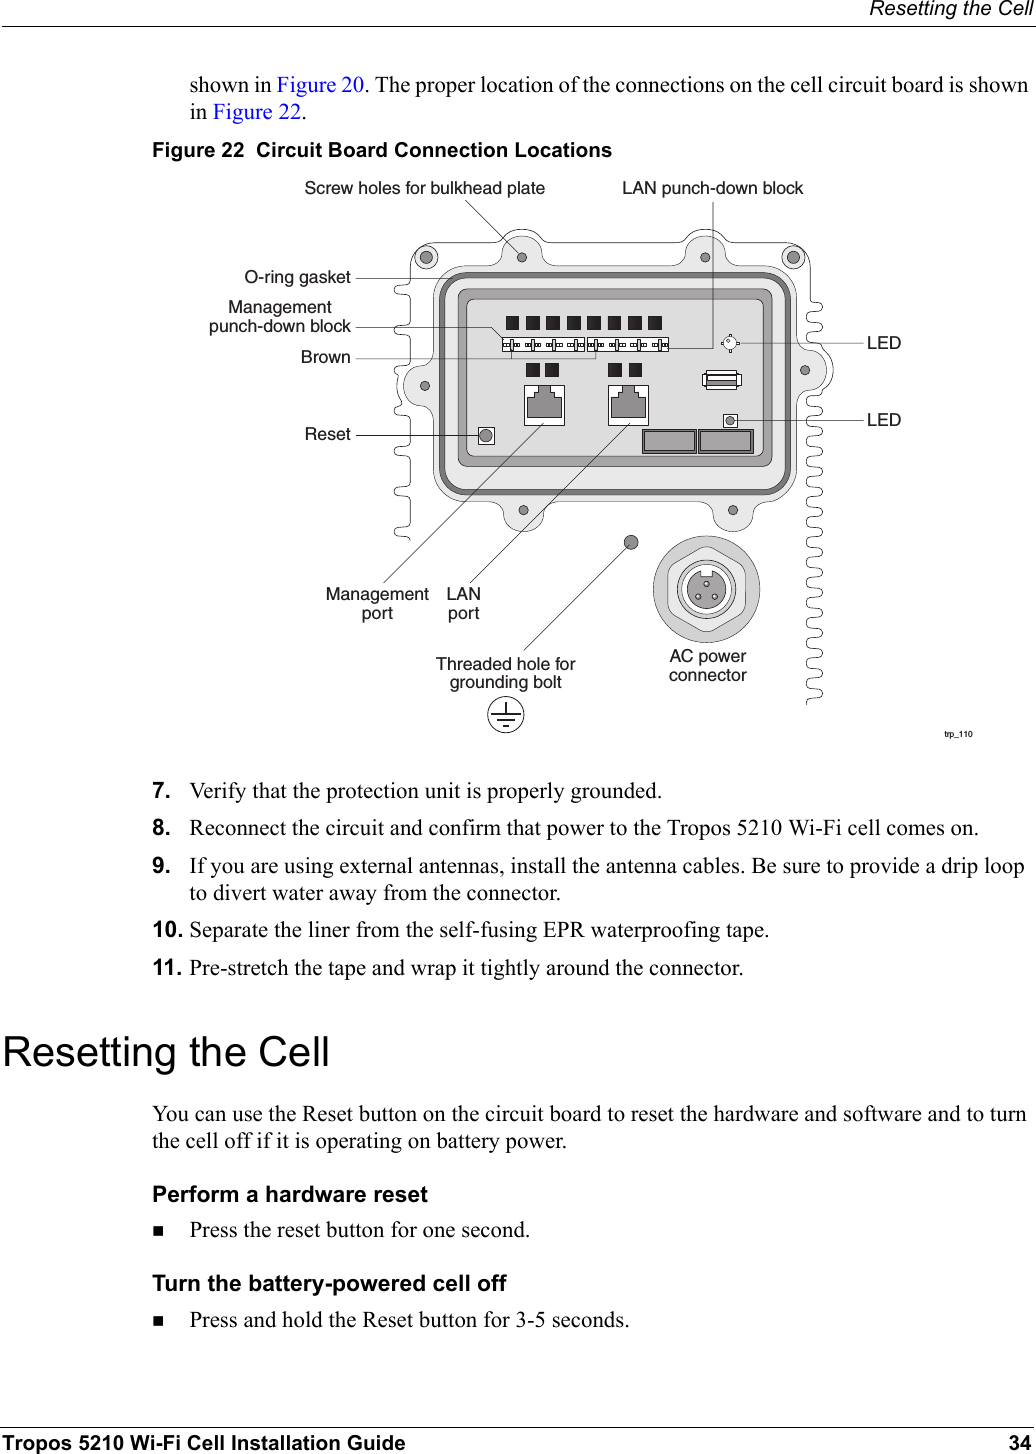 Resetting the CellTropos 5210 Wi-Fi Cell Installation Guide 34shown in Figure 20. The proper location of the connections on the cell circuit board is shown in Figure 22.Figure 22  Circuit Board Connection Locations7. Verify that the protection unit is properly grounded.8. Reconnect the circuit and confirm that power to the Tropos 5210 Wi-Fi cell comes on.9. If you are using external antennas, install the antenna cables. Be sure to provide a drip loop to divert water away from the connector.10. Separate the liner from the self-fusing EPR waterproofing tape.11. Pre-stretch the tape and wrap it tightly around the connector.Resetting the CellYou can use the Reset button on the circuit board to reset the hardware and software and to turn the cell off if it is operating on battery power.Perform a hardware resetPress the reset button for one second.Turn the battery-powered cell off Press and hold the Reset button for 3-5 seconds.trp_110AC powerconnectorManagementportResetBrownManagementpunch-down blockLAN punch-down blockScrew holes for bulkhead plateLEDLEDThreaded hole forgrounding boltO-ring gasketLANport